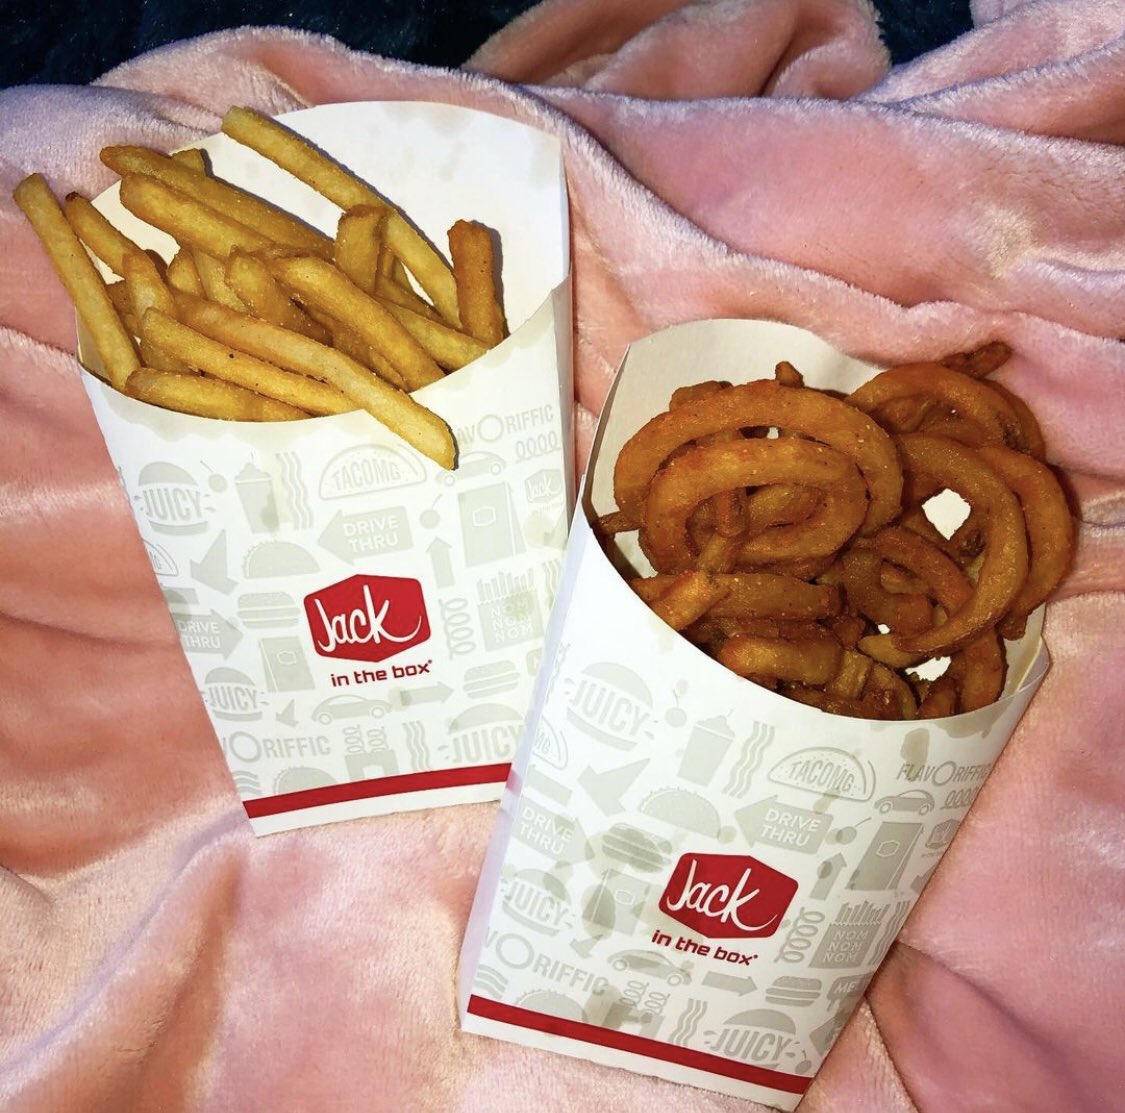 fast food is a huge go-to when you don’t have the desire to exist so here are some of my vegan fast food go-tos:- Burger King French toast sticks and hash browns & impossible whoppers- Taco Bell (fresco style removes all dairy, beans instead of beef)- jack’s French fries